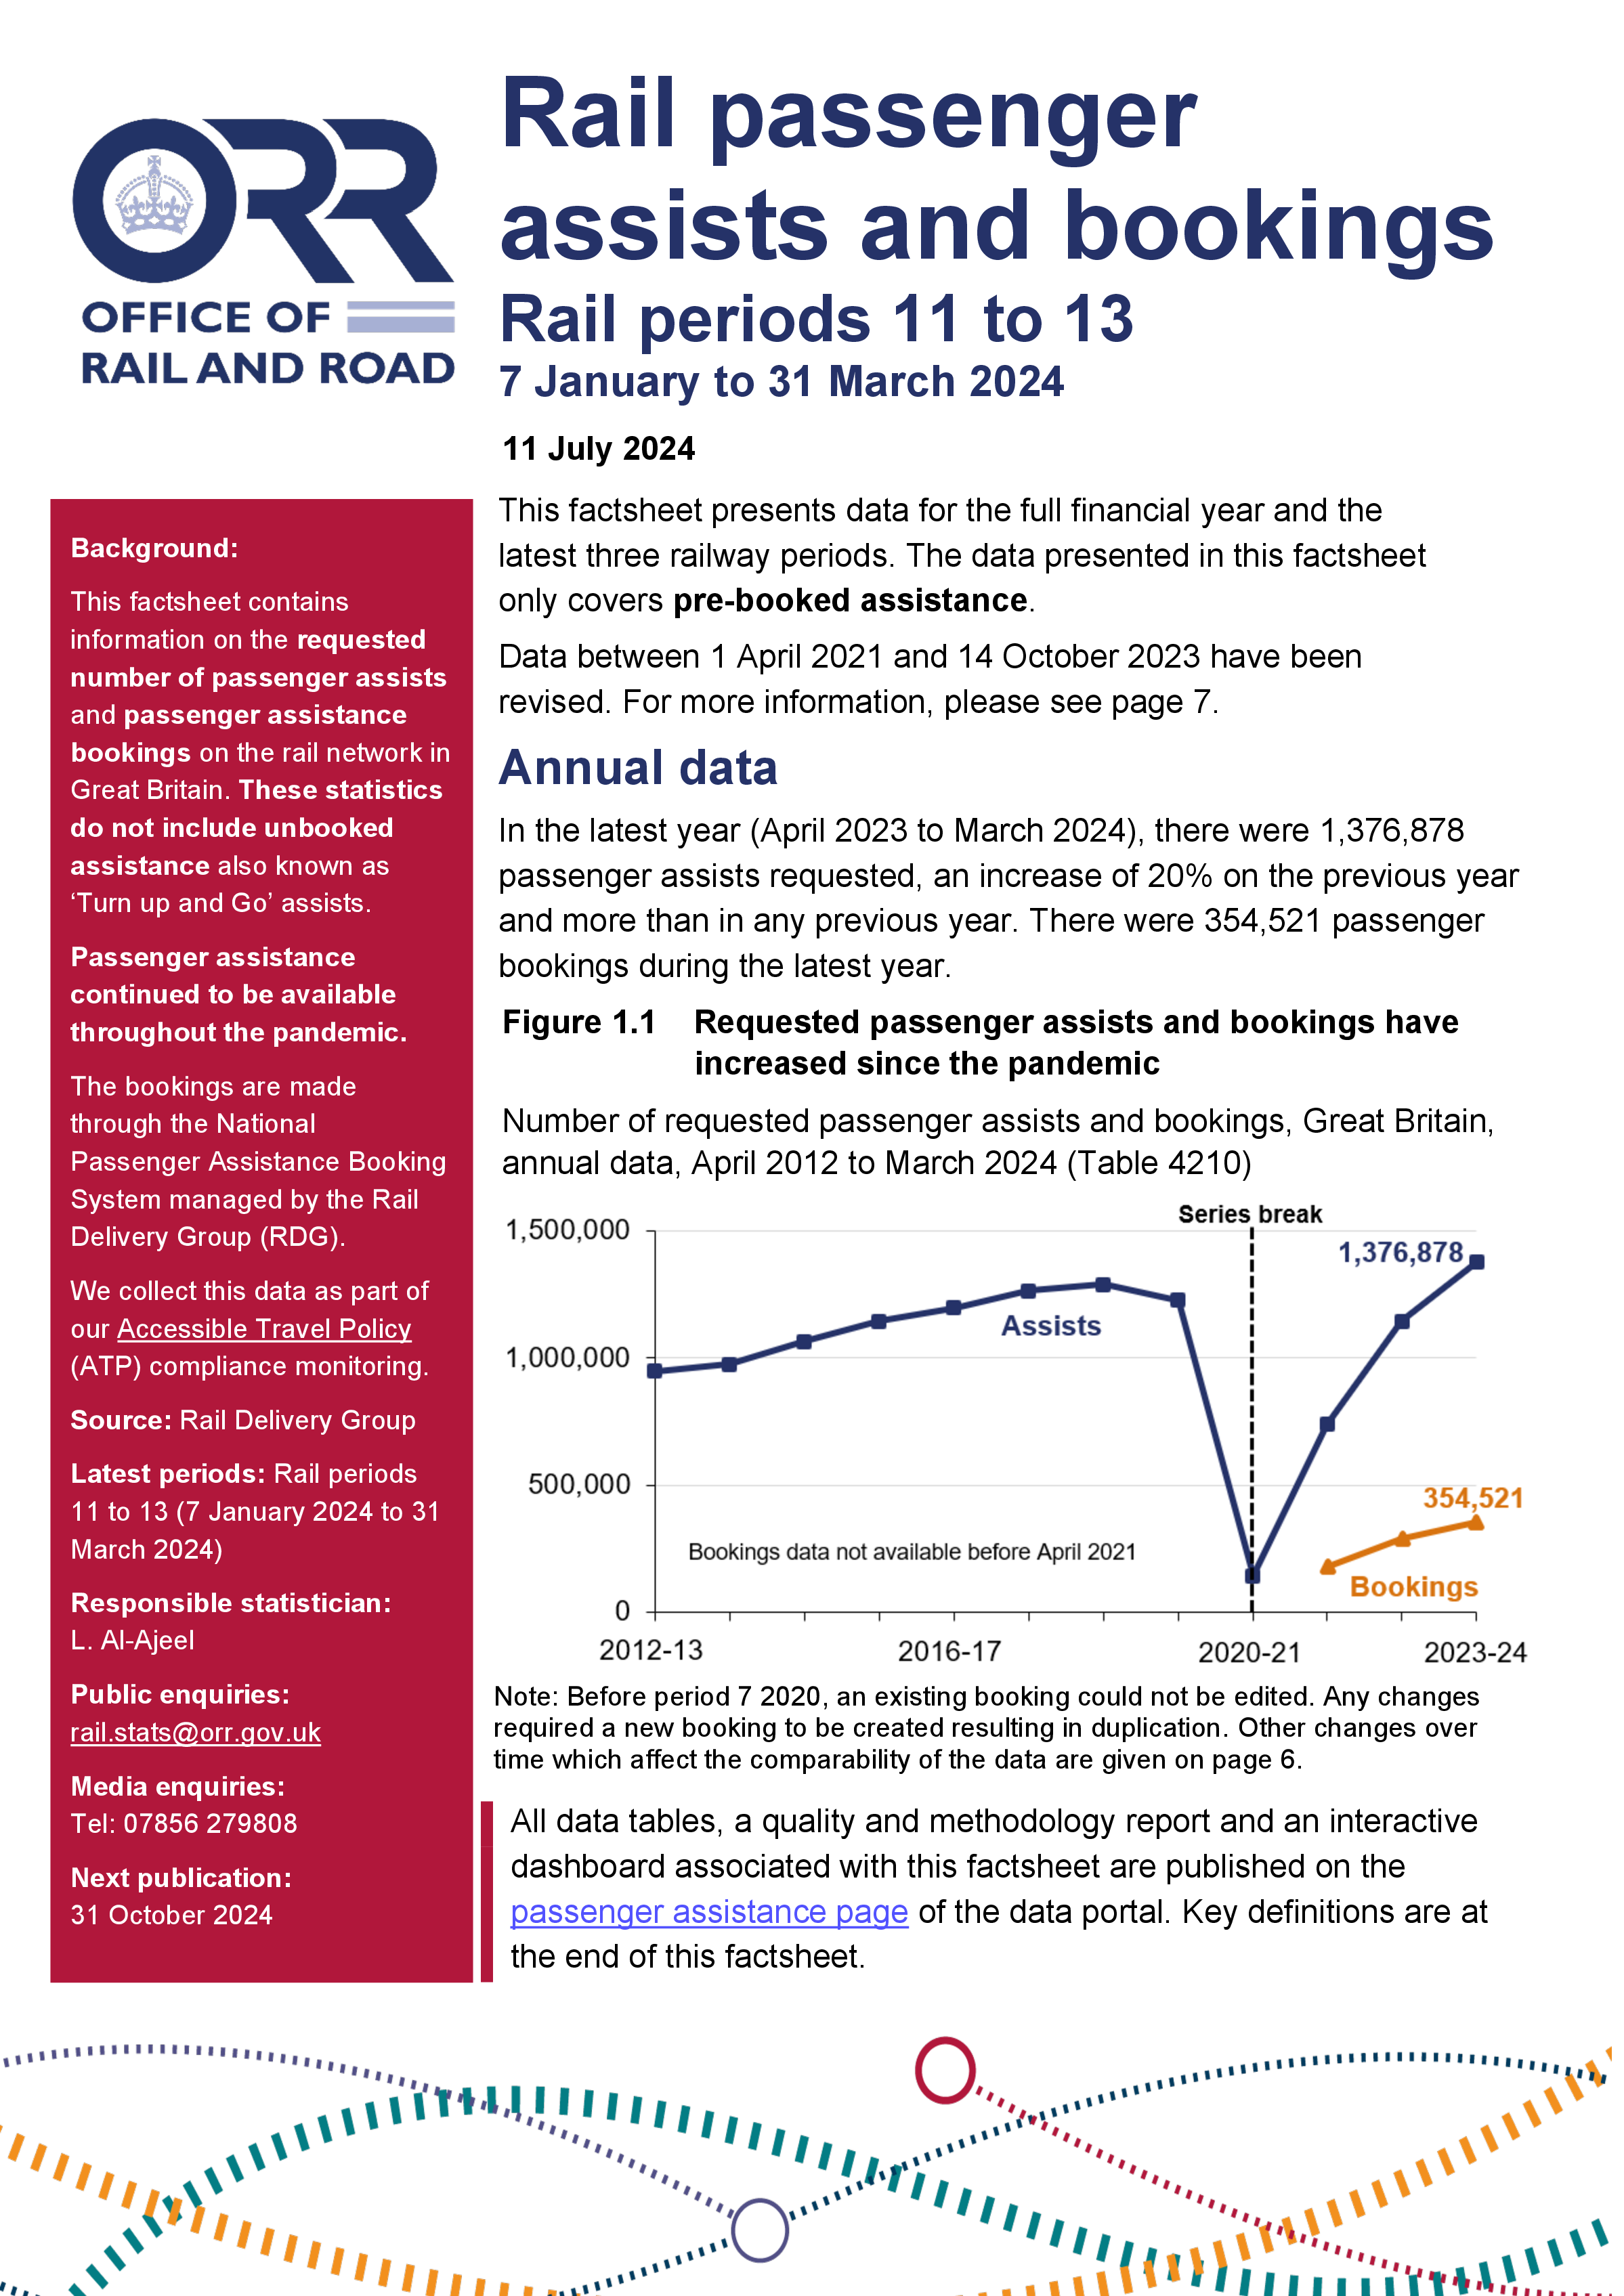 Rail passenger assists 2023-24 Periods 11 to 13 (7 January 2024 to 31 March 2024)